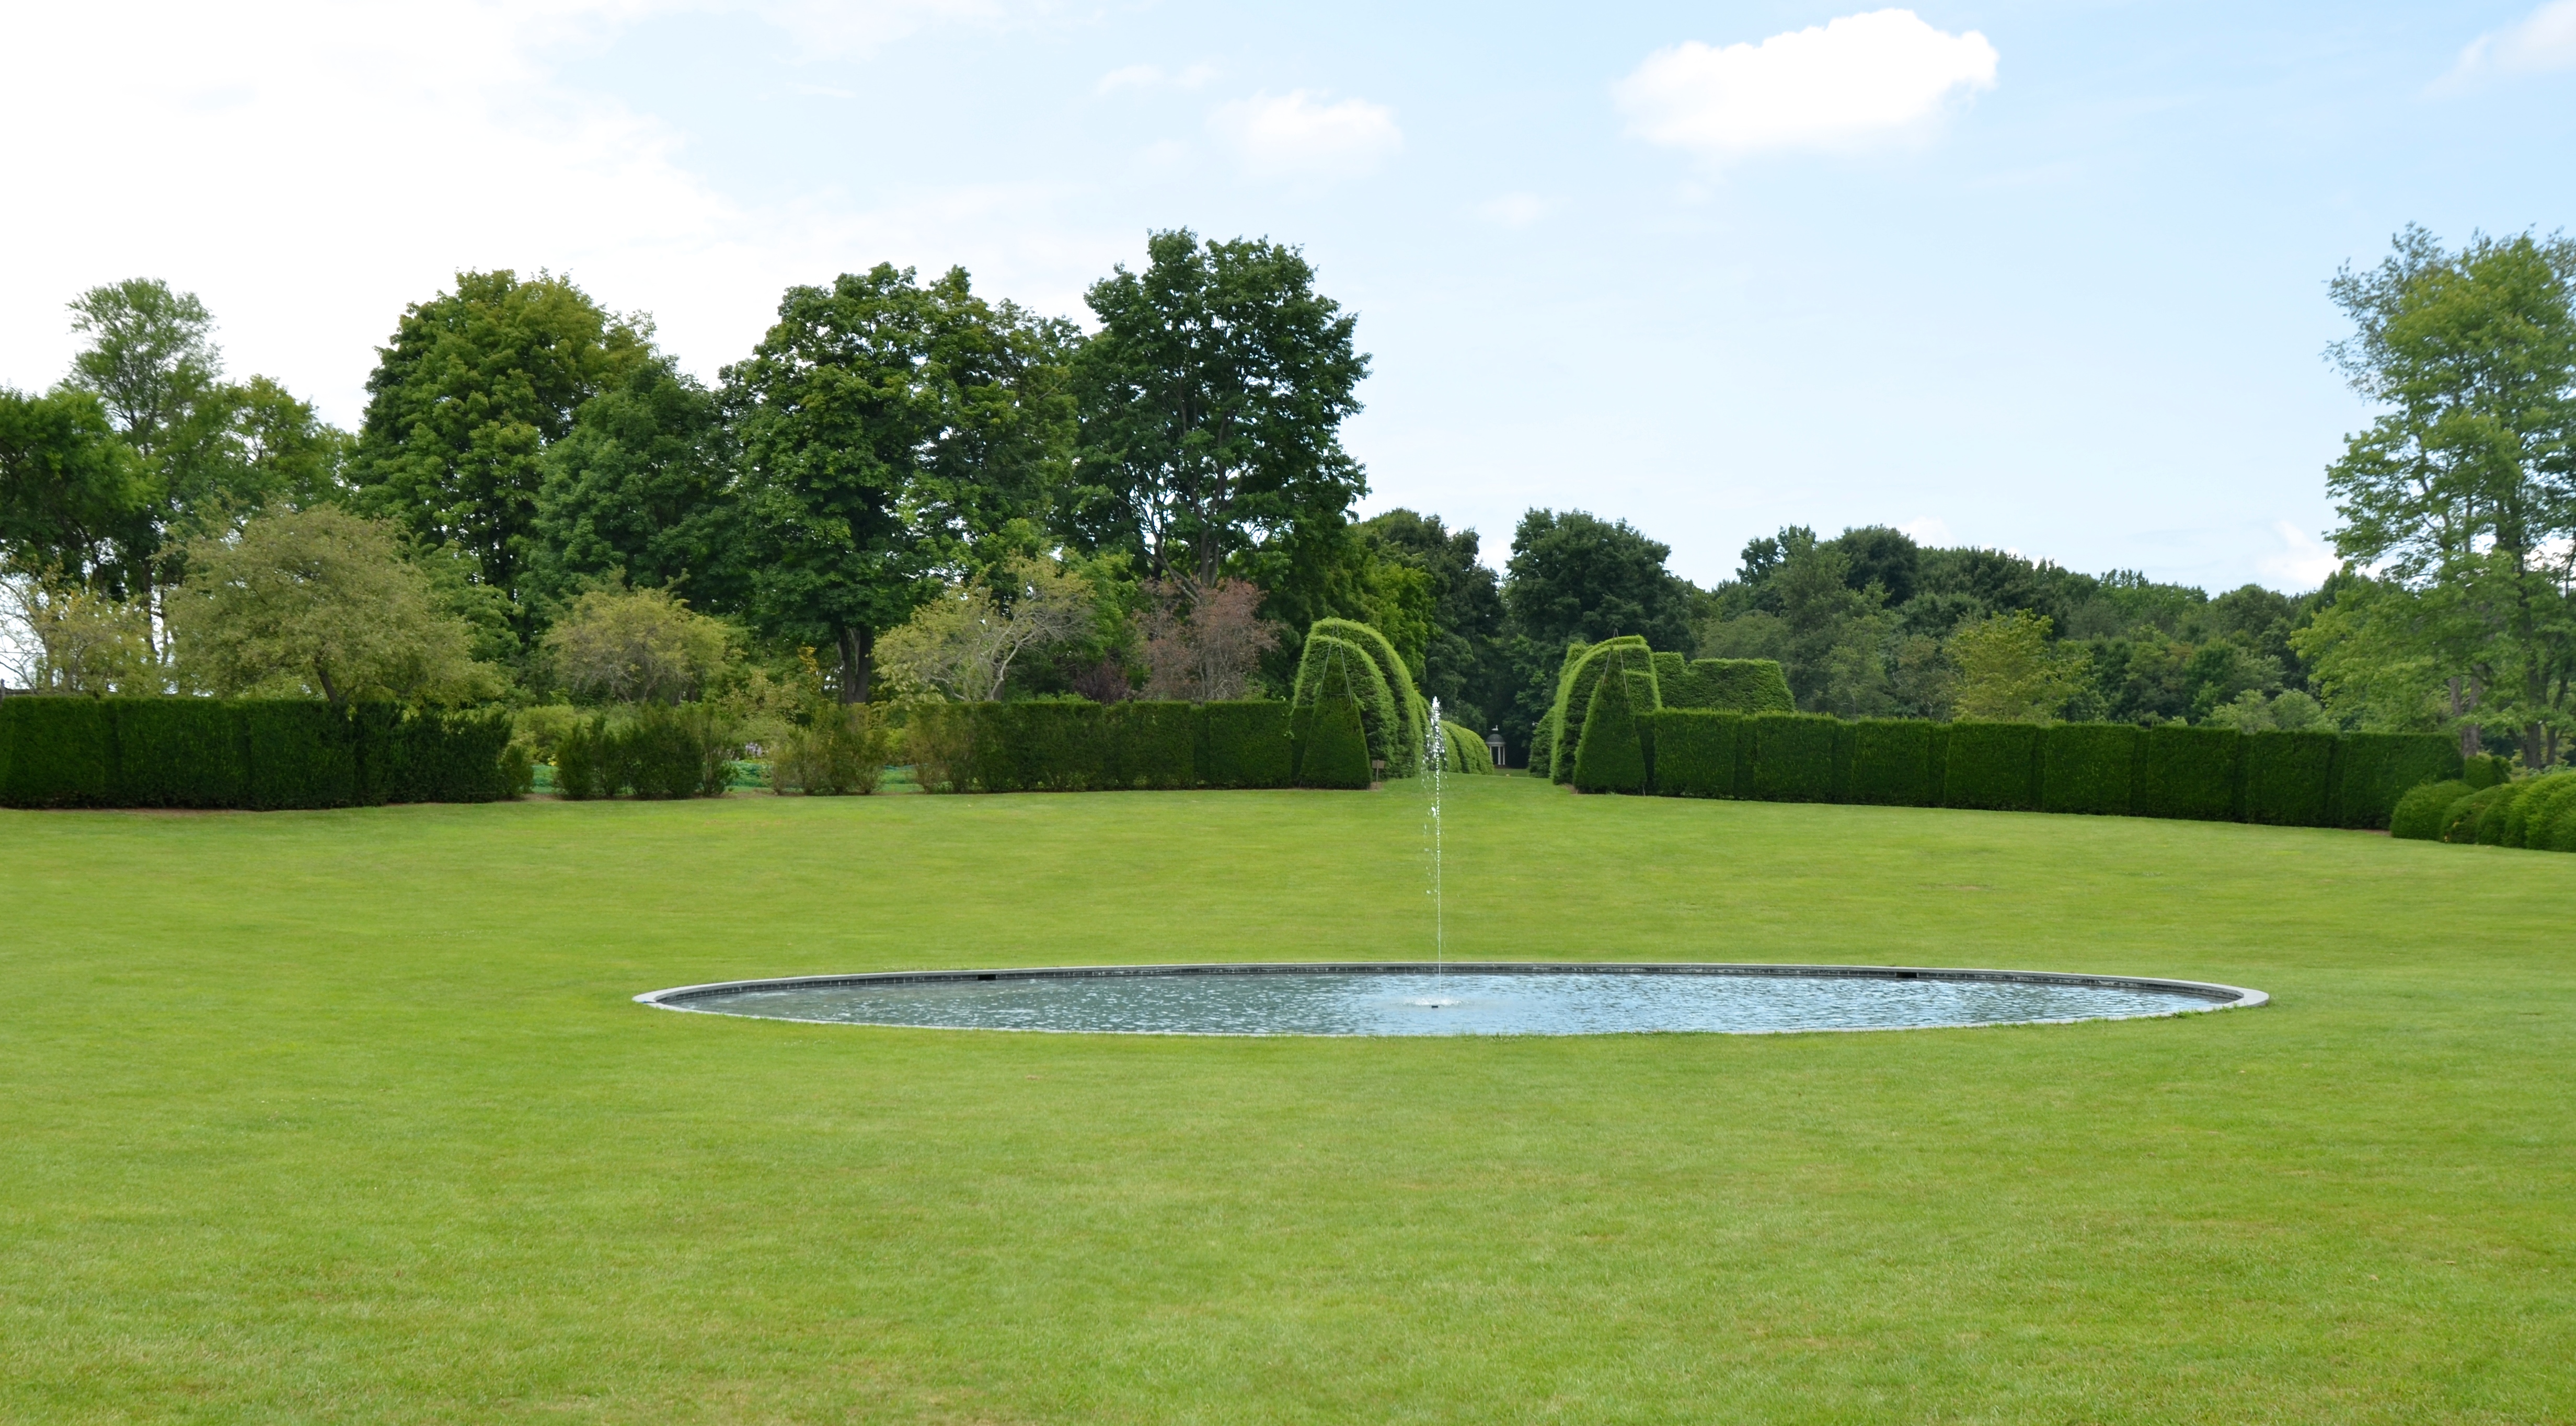 A tranquil oval pool reflects the sky in the center of the Great Bowl at Ladew Topiary Garden